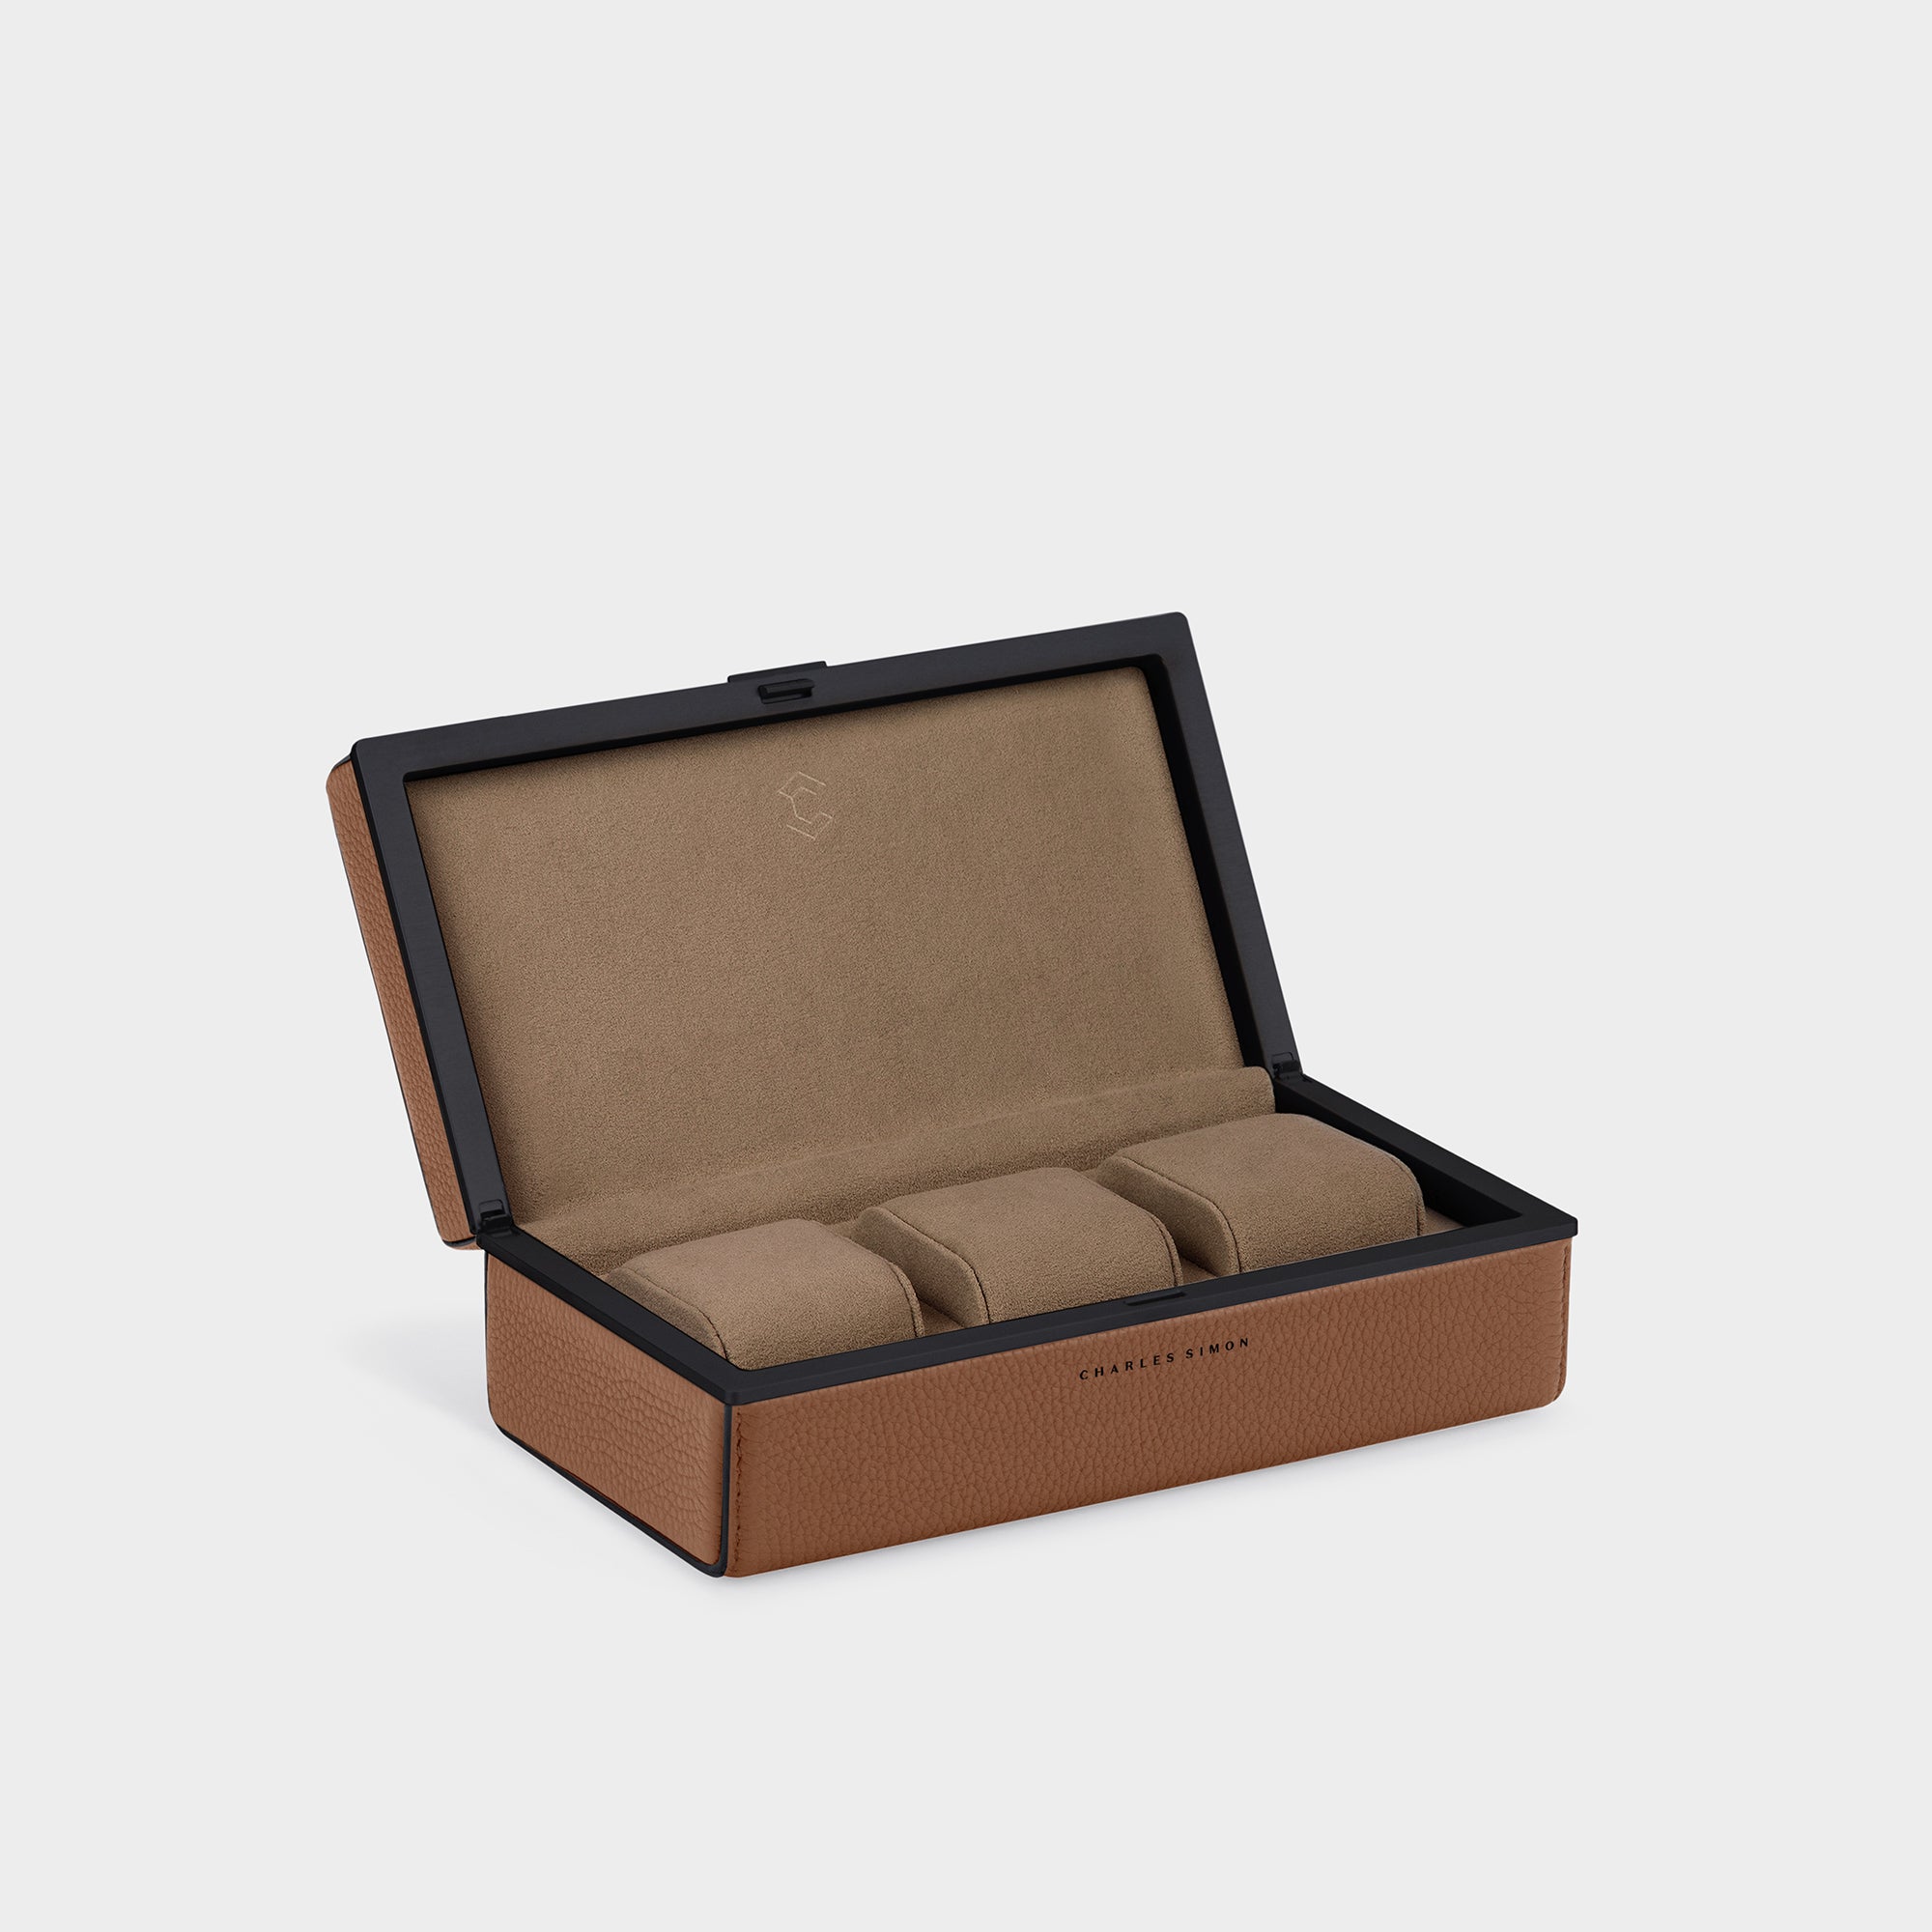 Luxury watch case for up to 3 watches. Handmade in Canada from premium tan French leather with black contrasting edges, Camel Alcantara and black anodized aluminum.